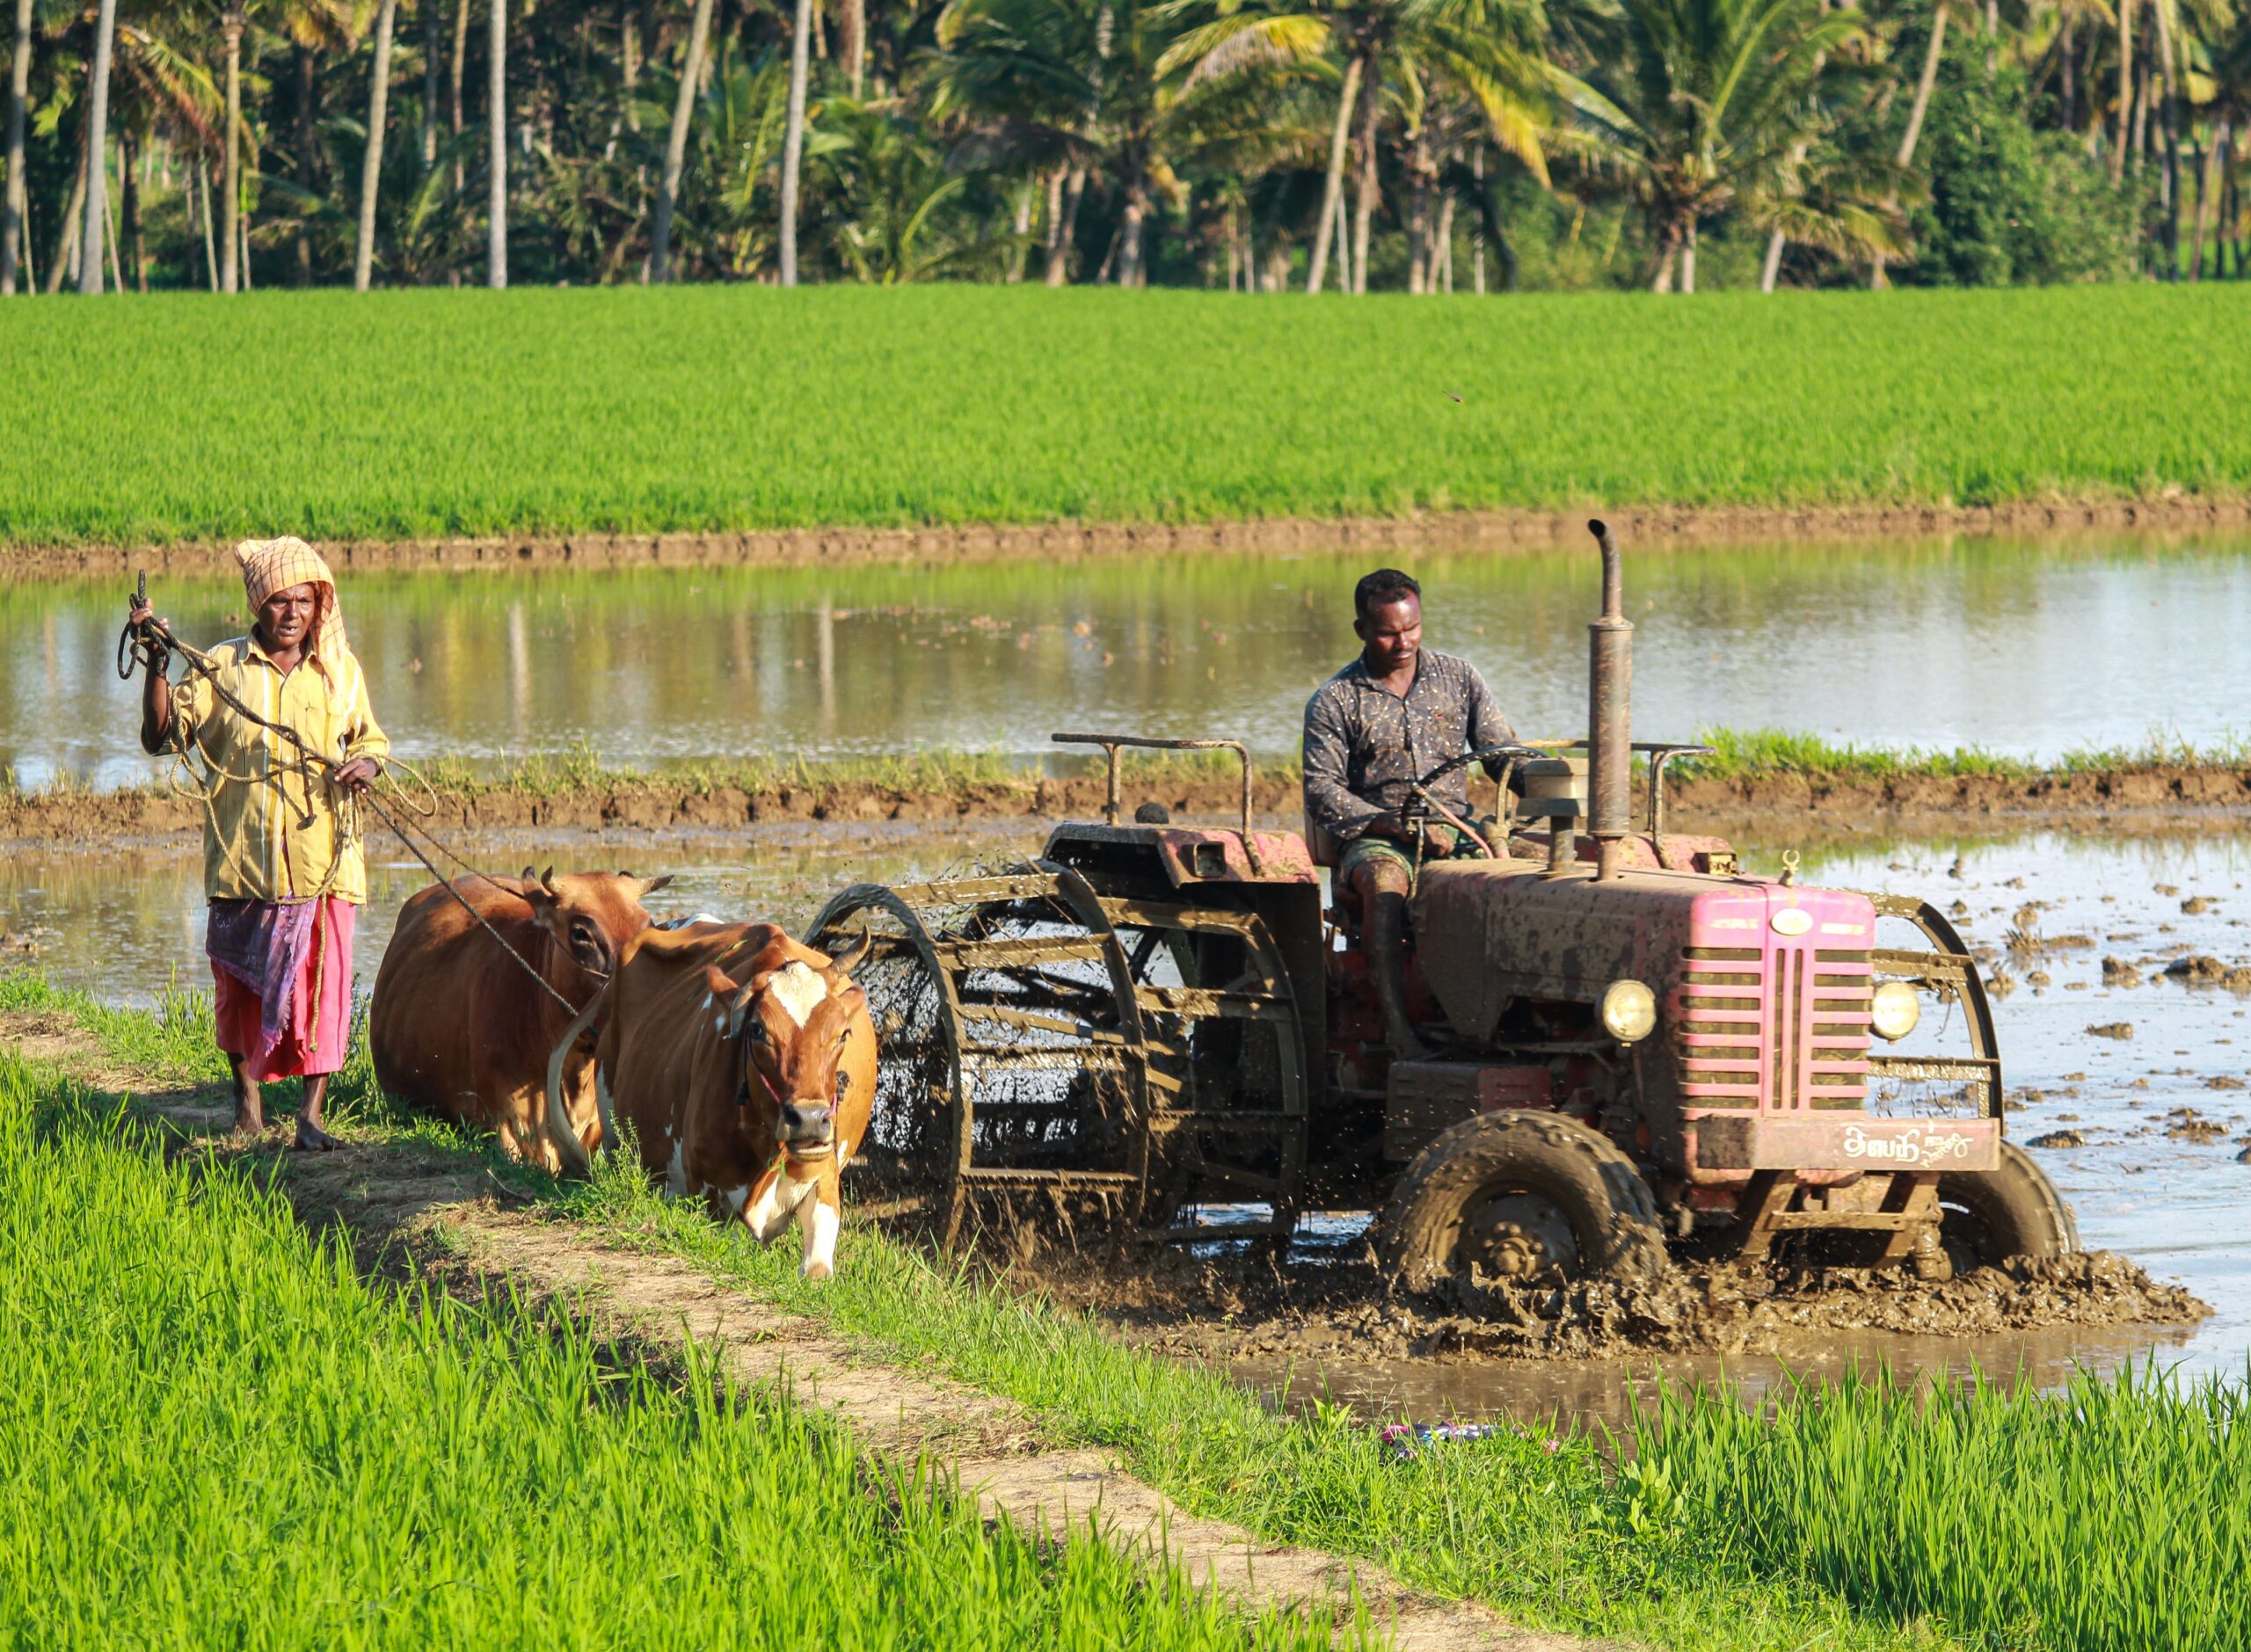 A woman and a man working in a field with cows